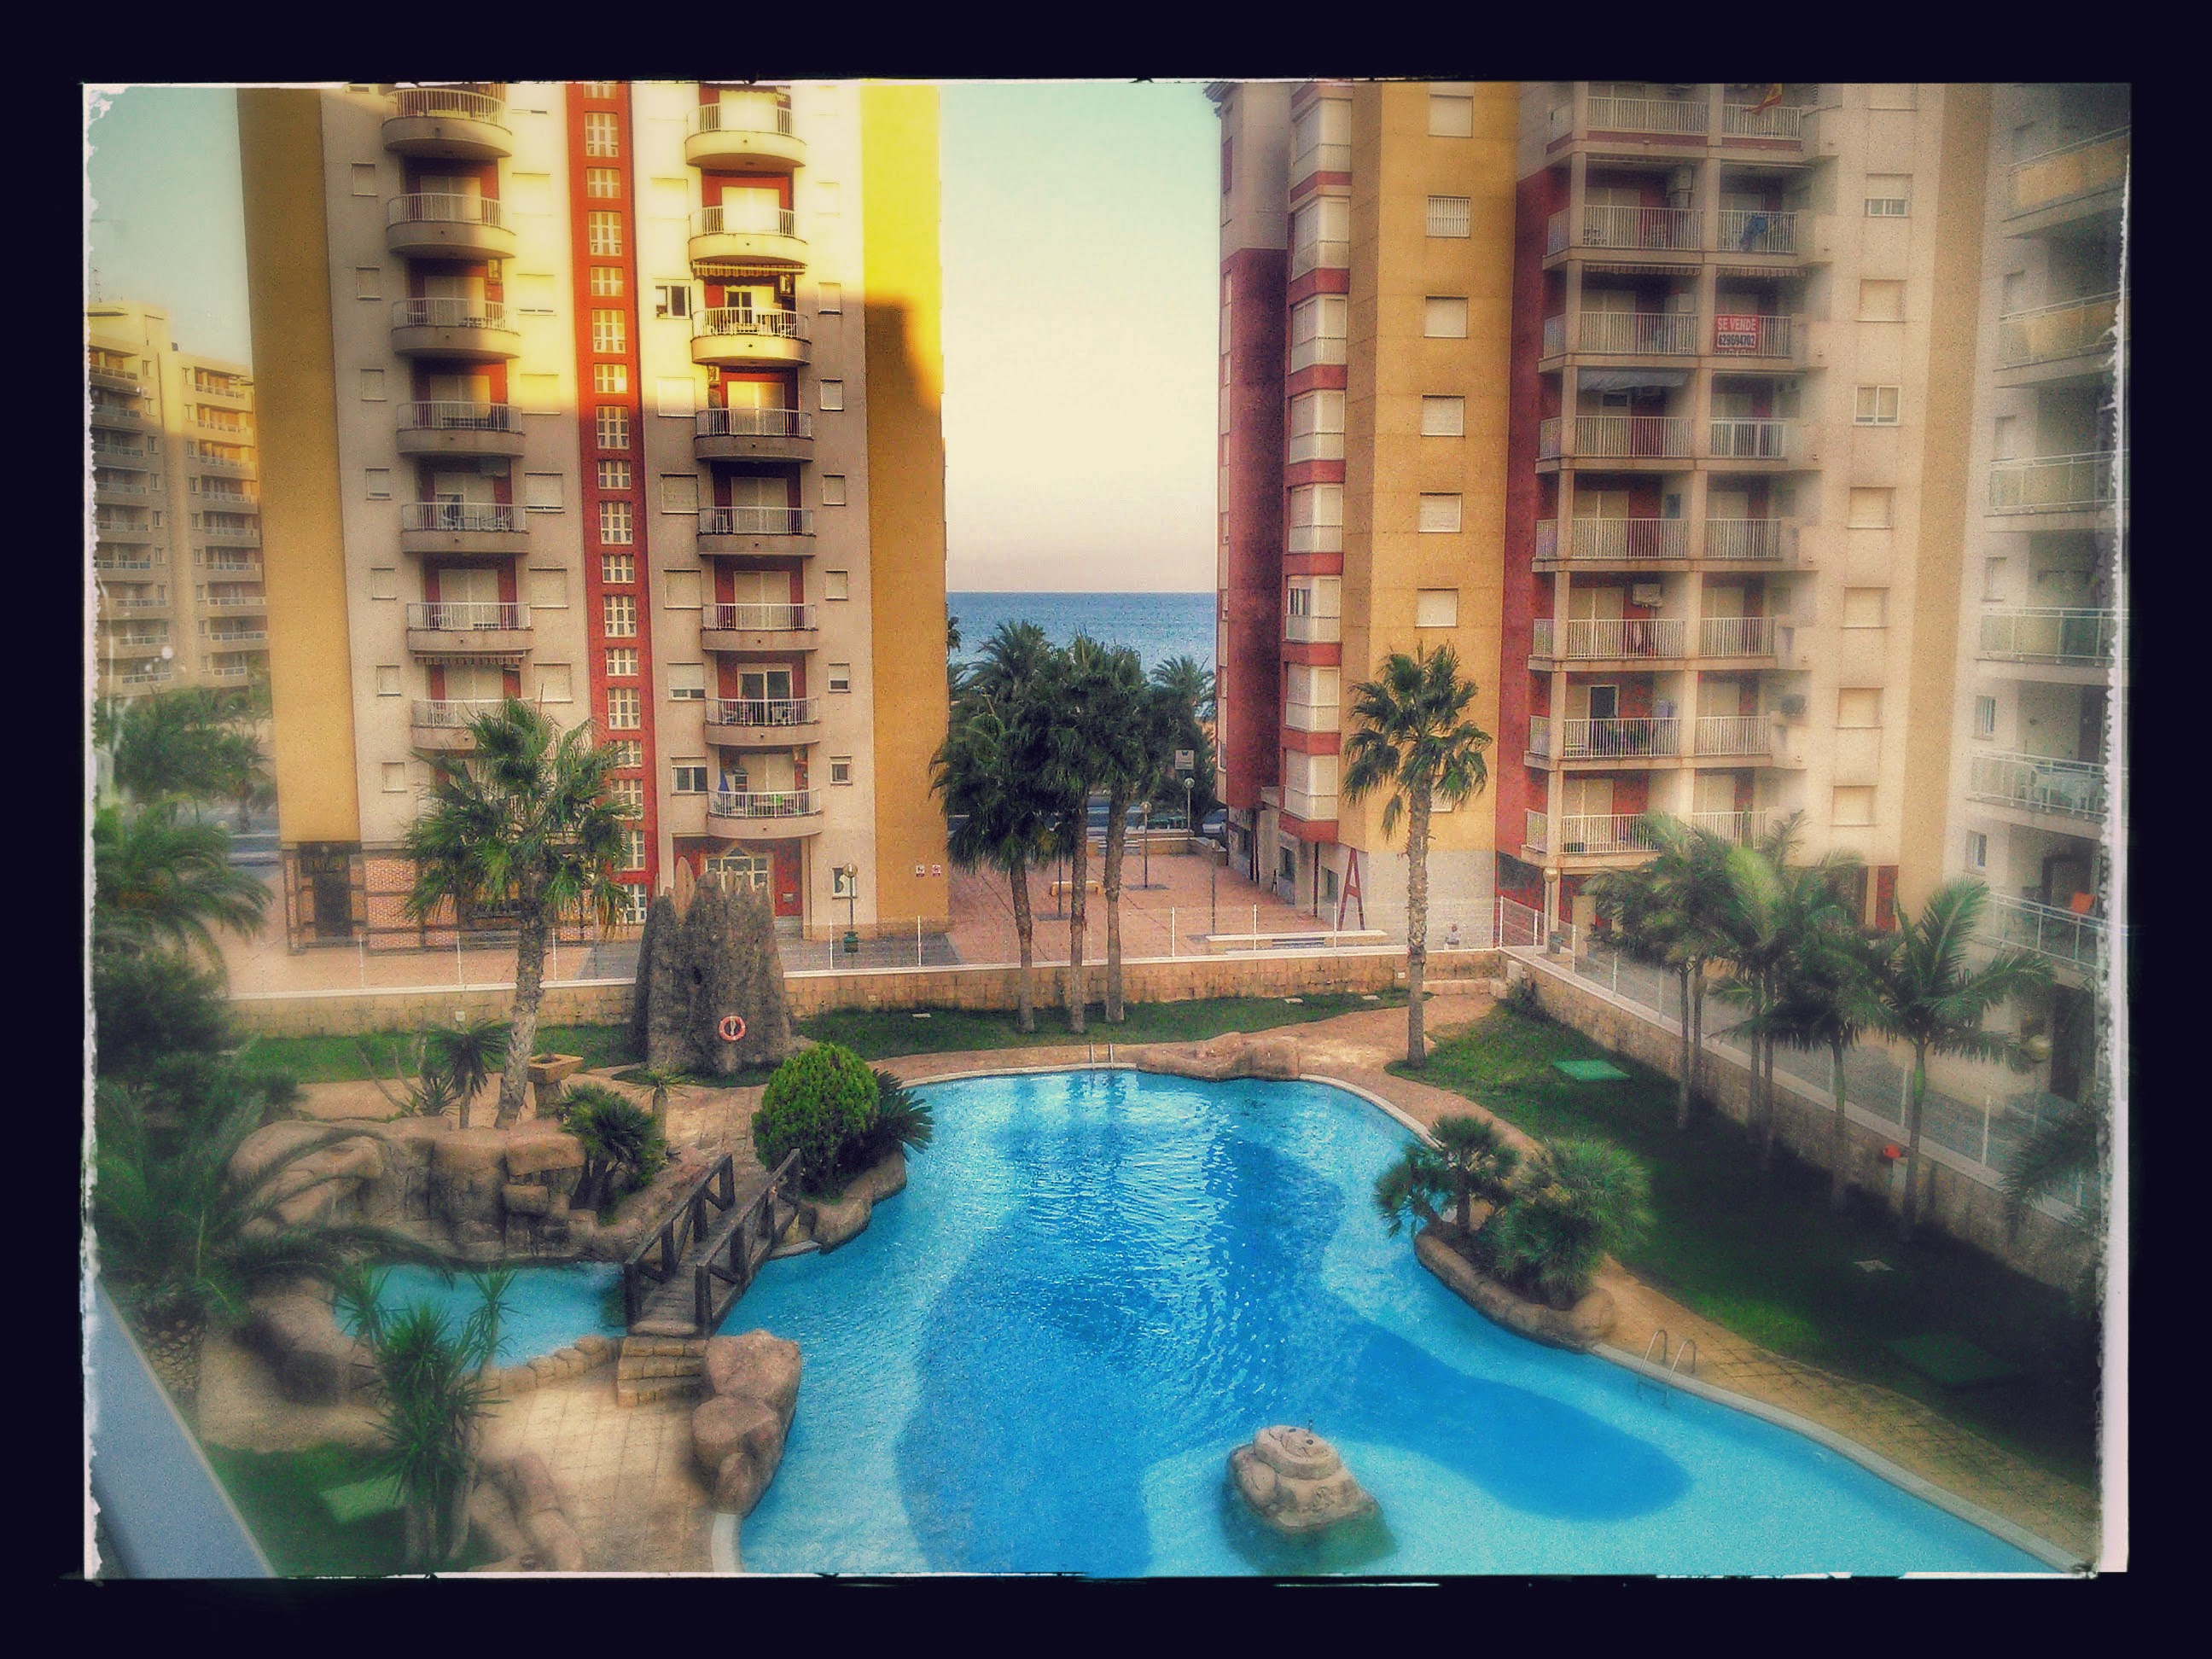 A view from the balcony of a swimming pool, with the ocean in the background